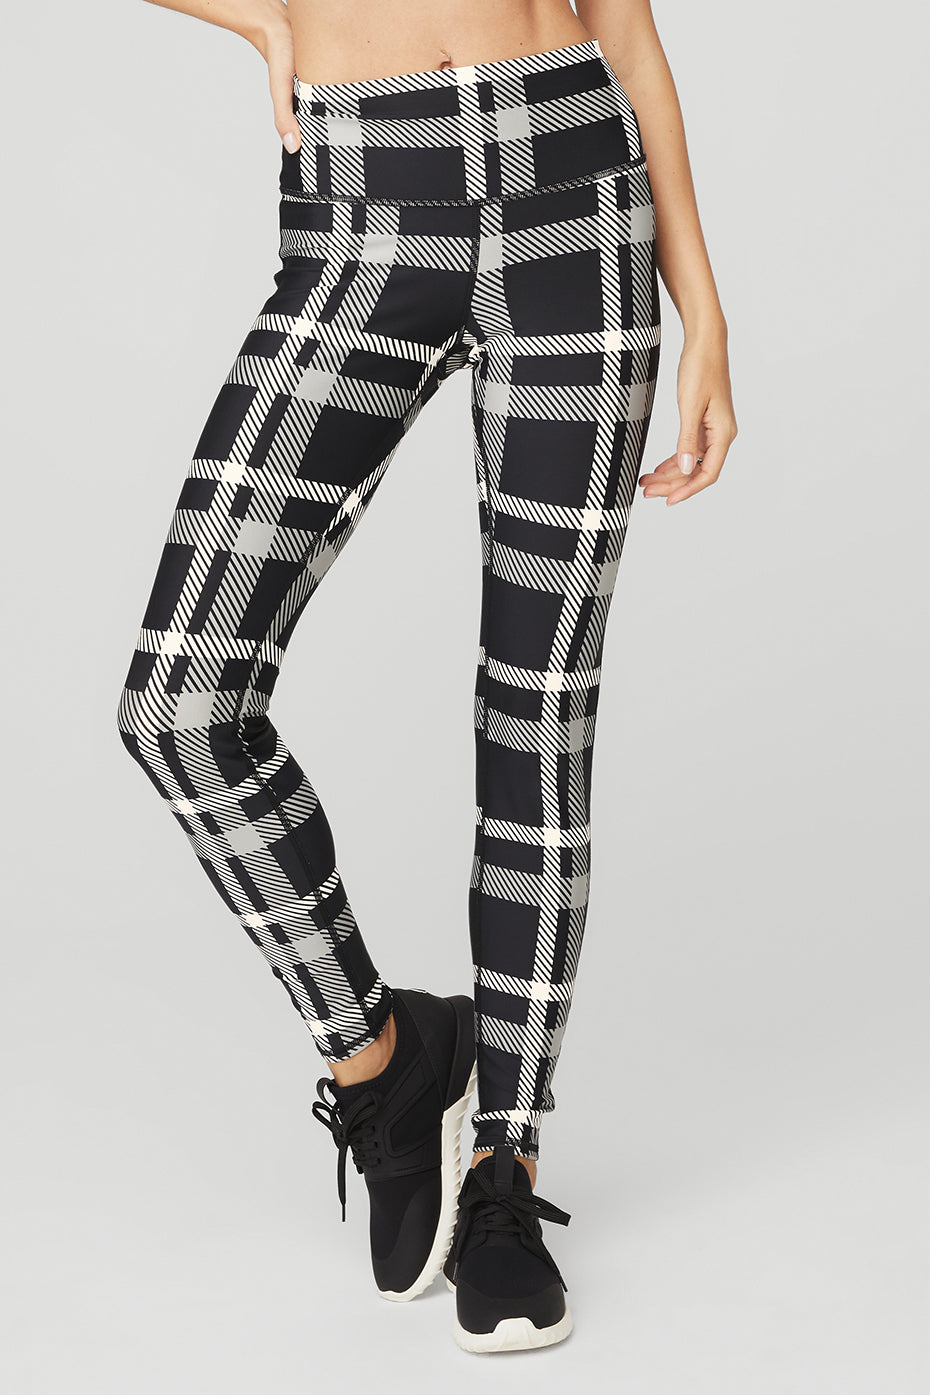 Airlift High-Waist Magnified Plaid Legging in Black/Ivory by Alo